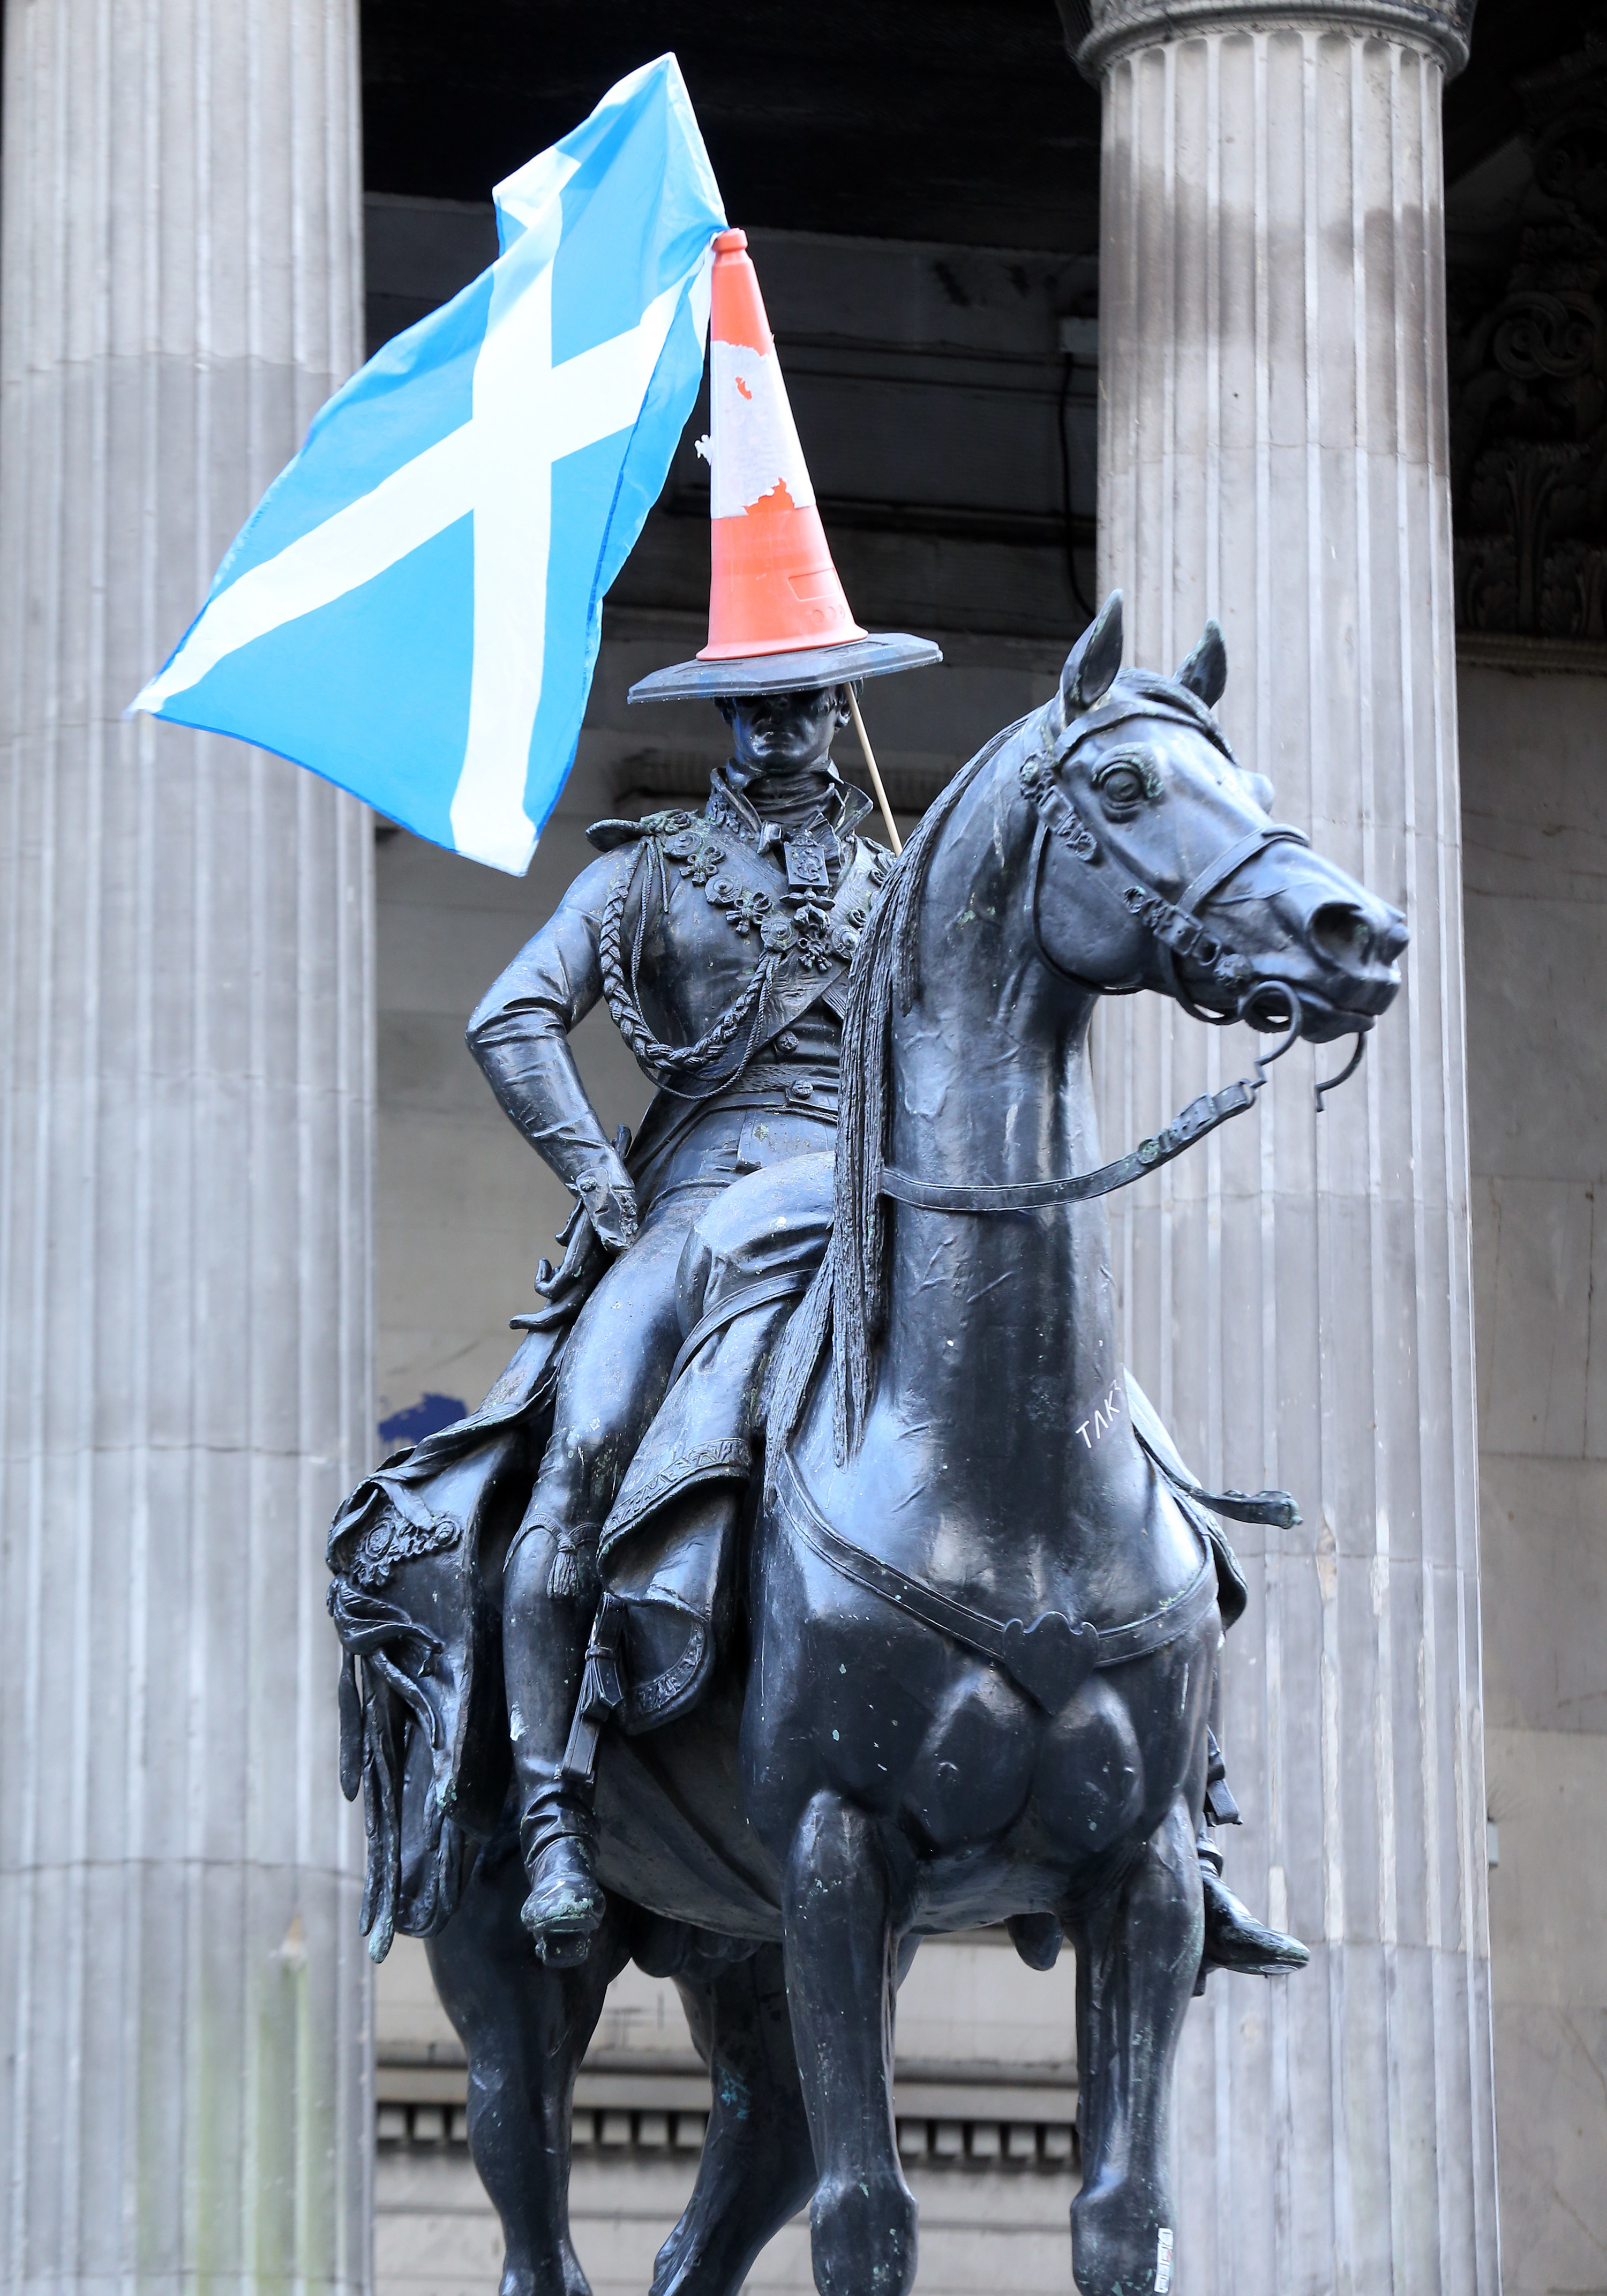 The Equestrian statue of the Duke of Wellington in Glasgow